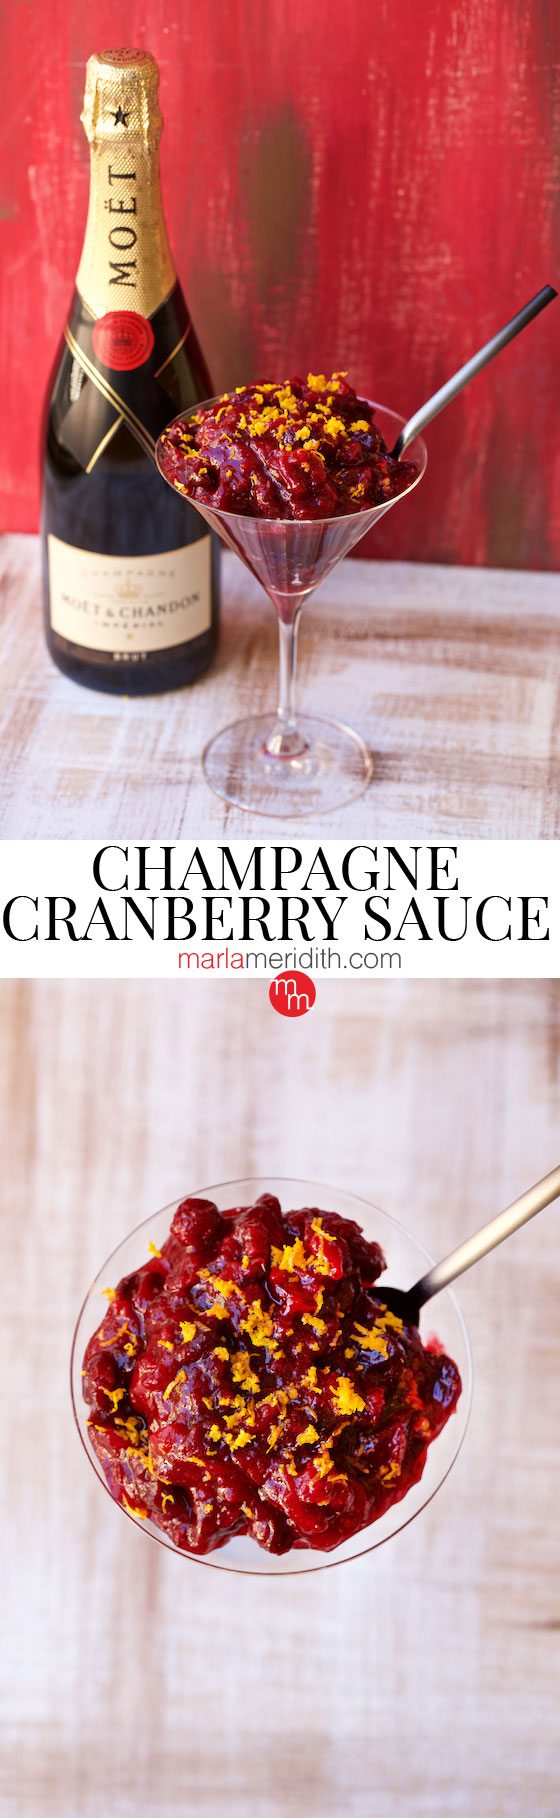 Champagne Cranberry Sauce recipe! You need this at your holiday table! MarlaMeridith.com ( @marlameridith )